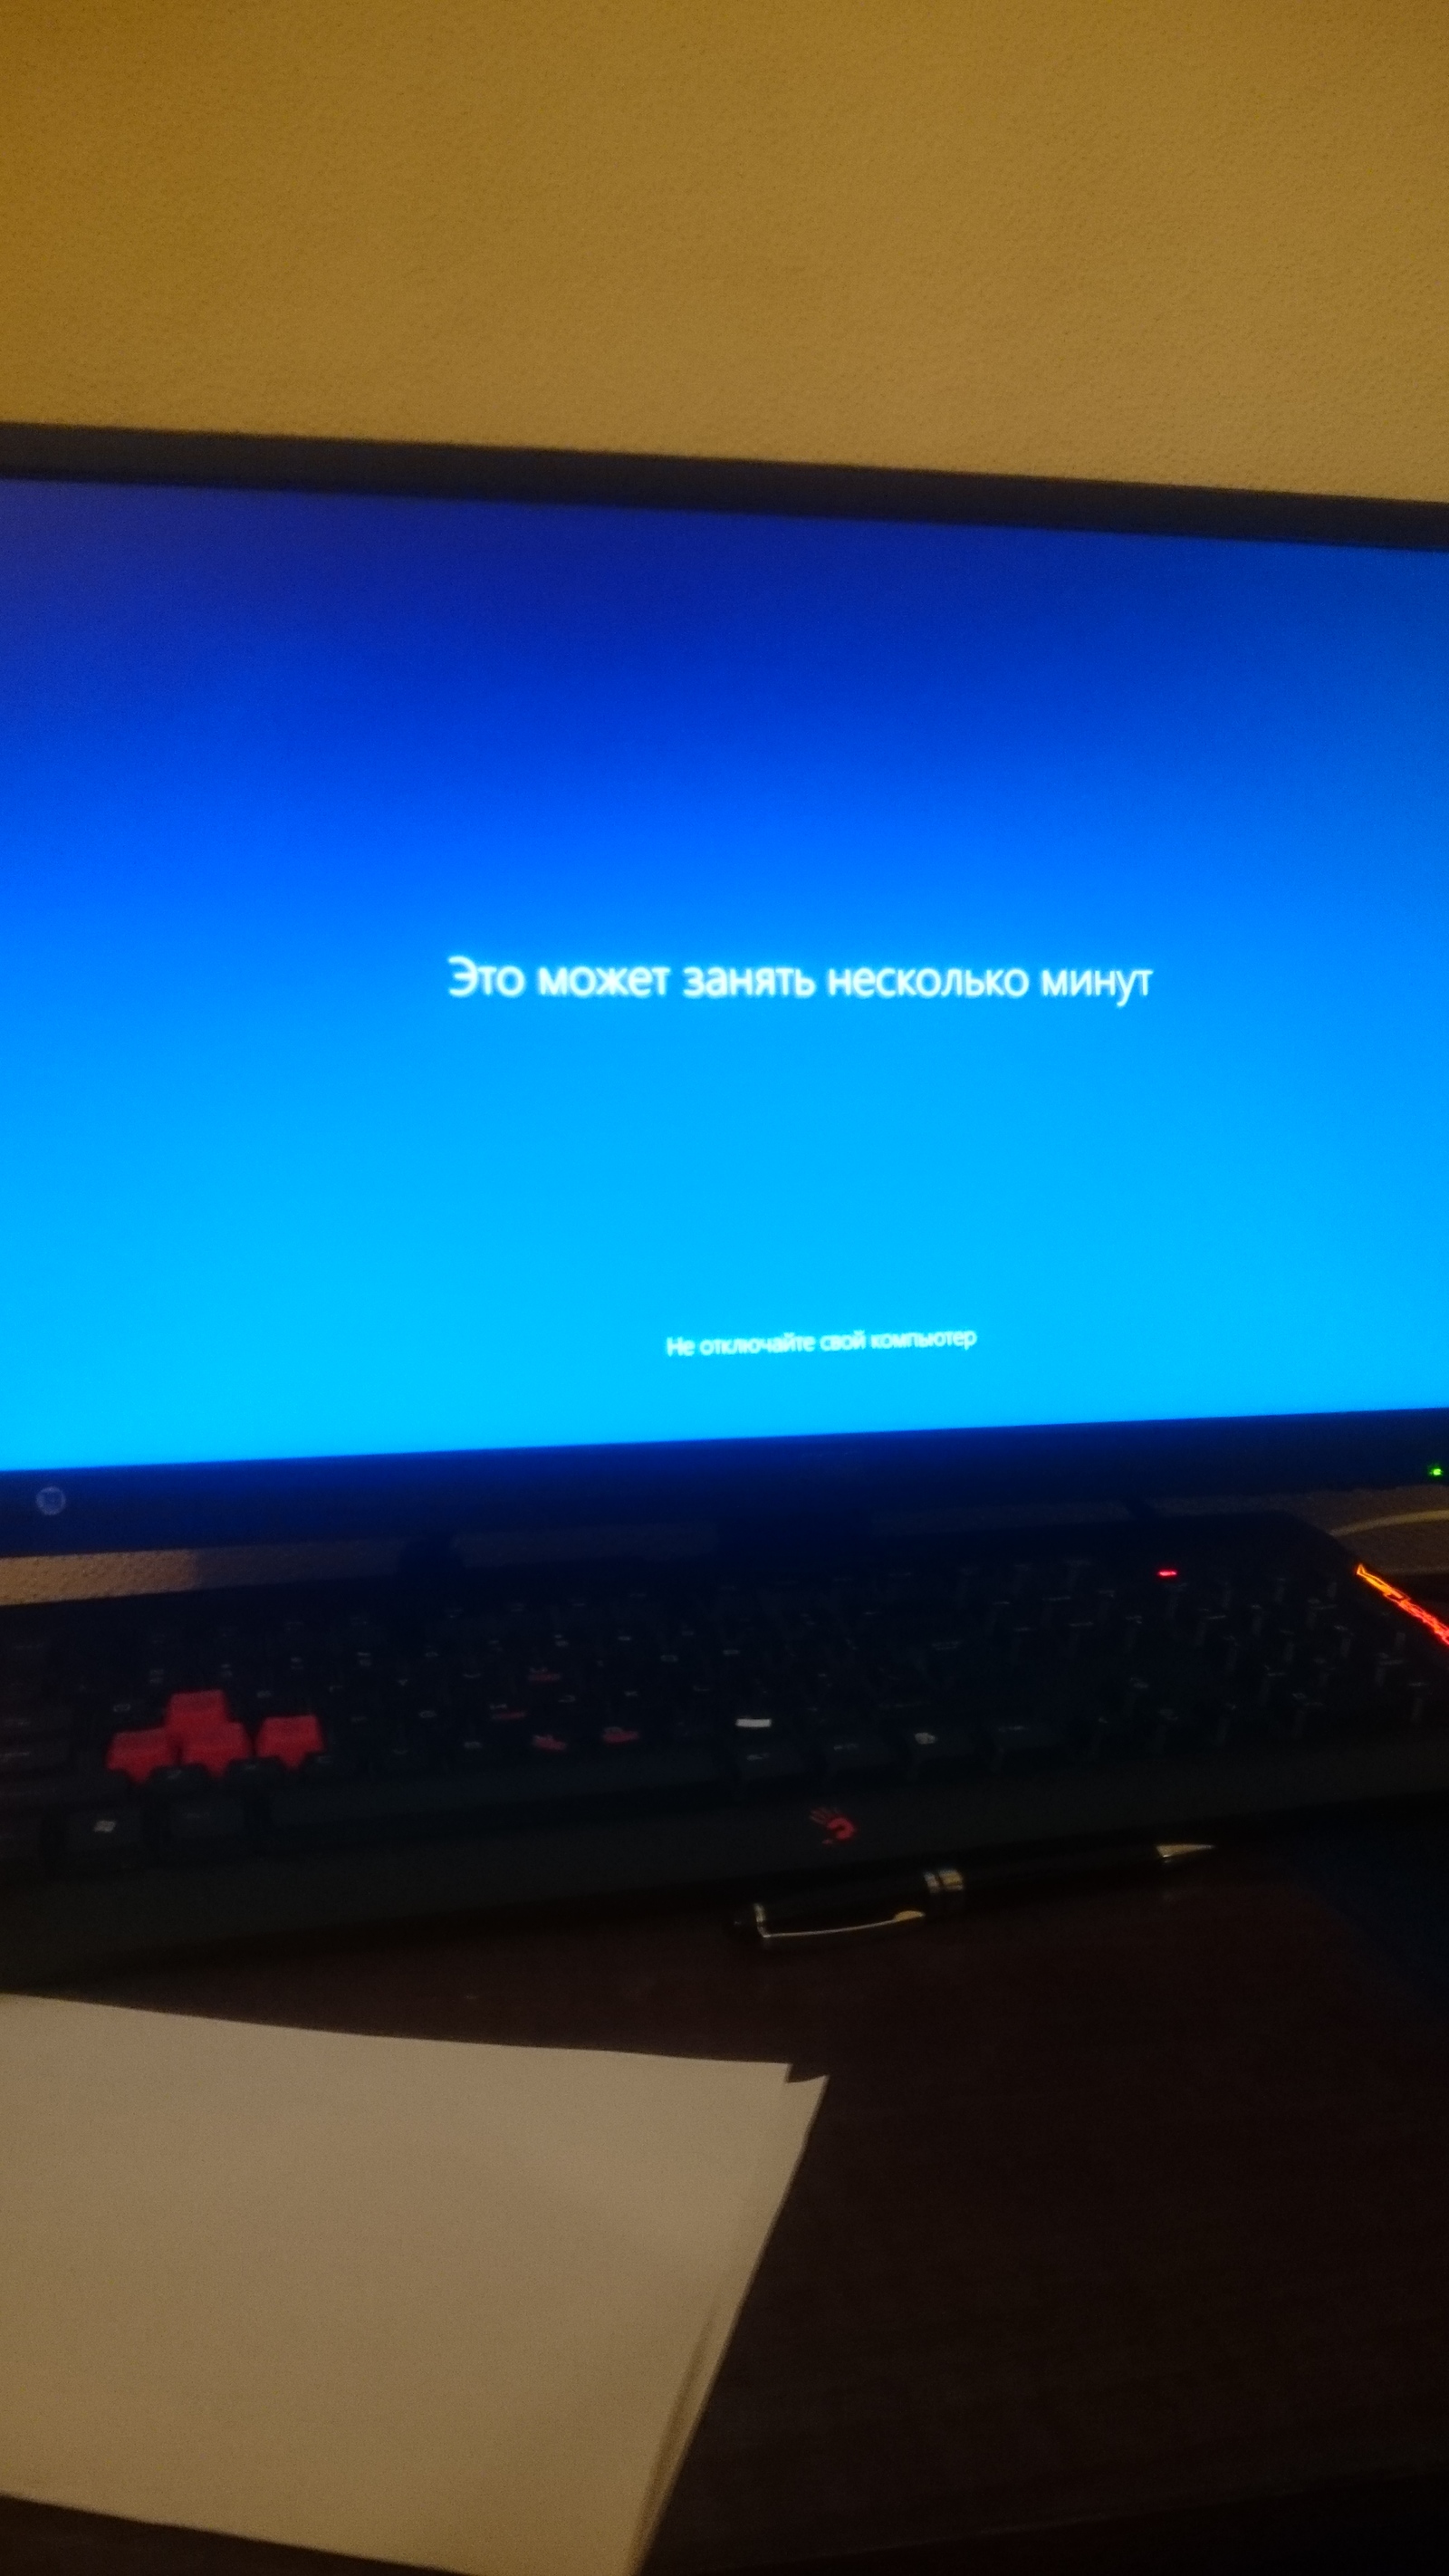 An hour later - Windows 10, What's happening?